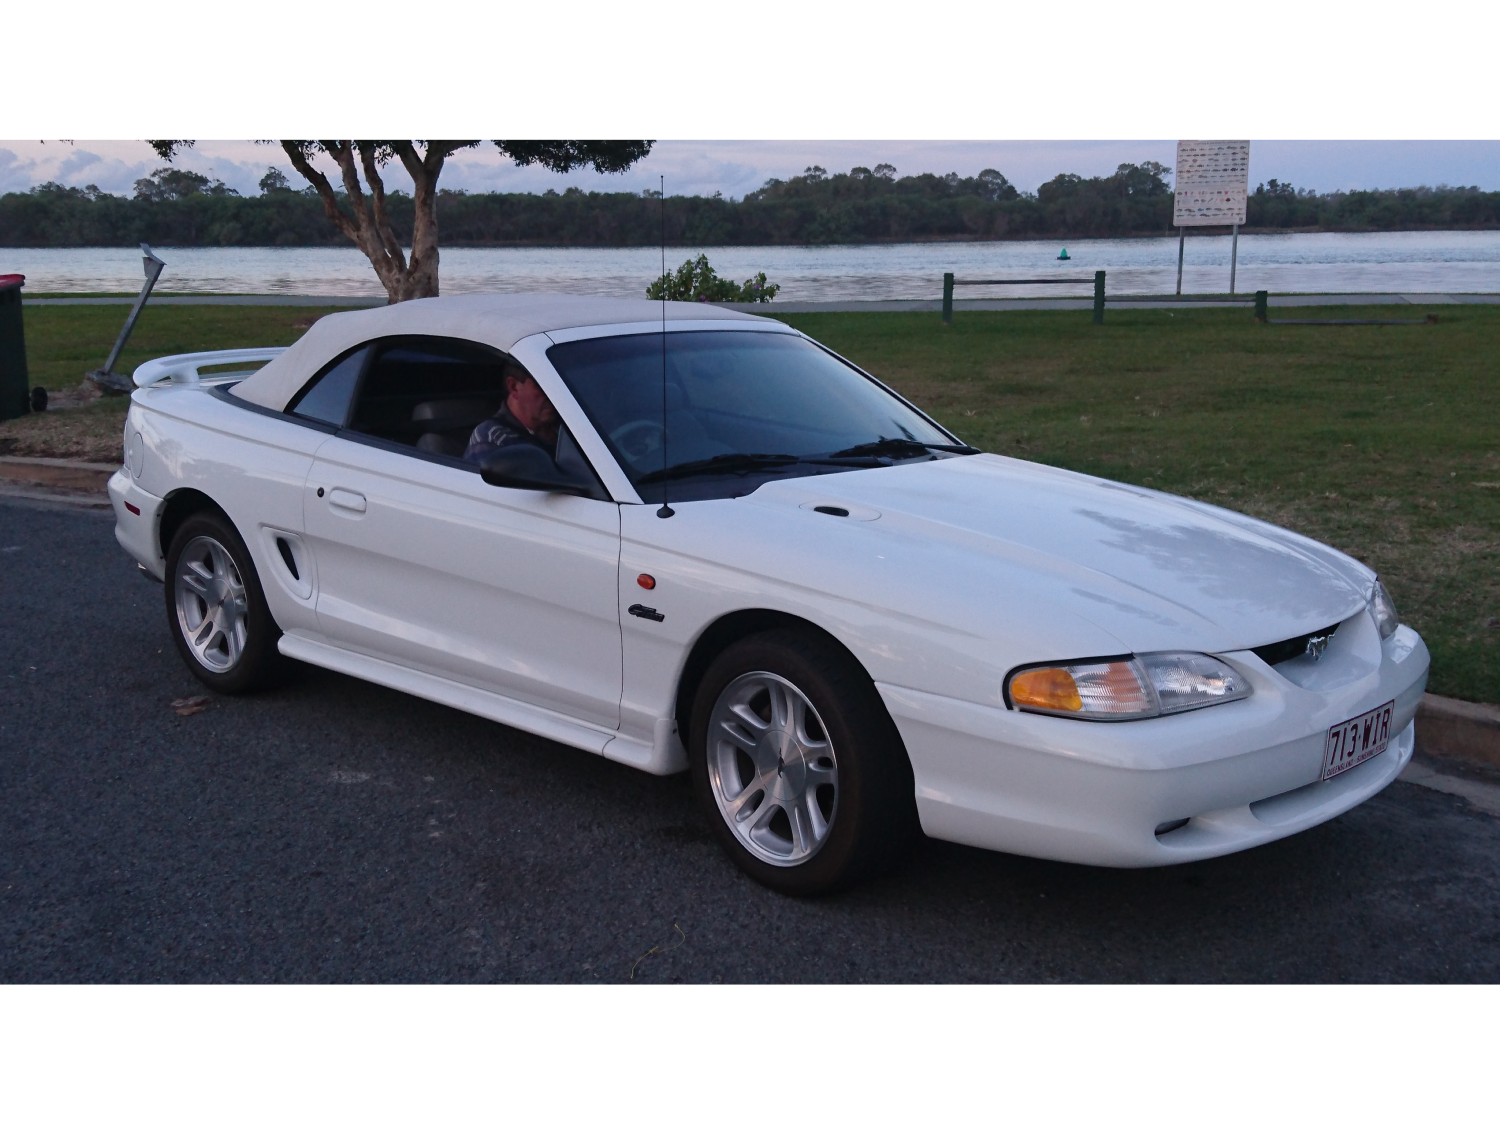 1998 Ford MUSTANG GT - MSTG98 - Shannons Club